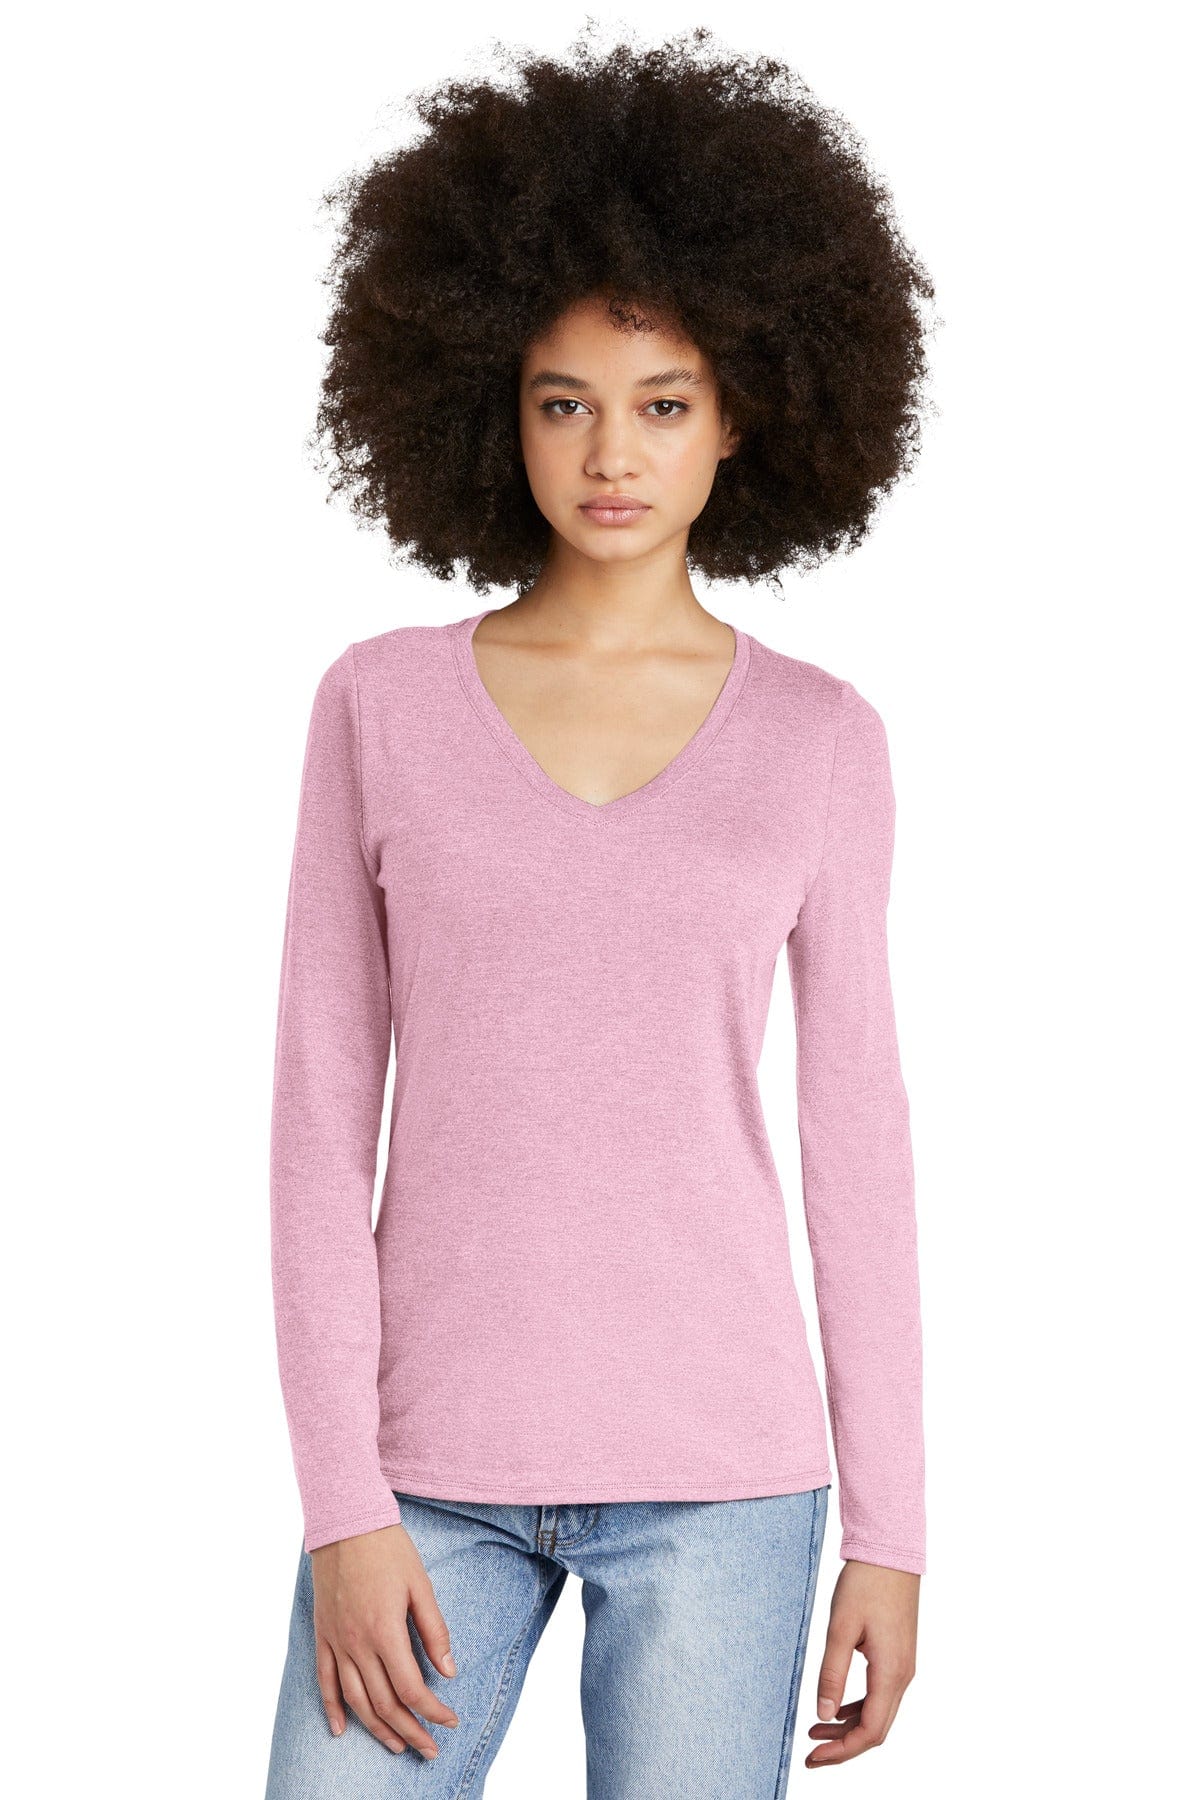 District ® Women's Perfect Tri ® Long Sleeve V-Neck Tee DT135, Basic Colors